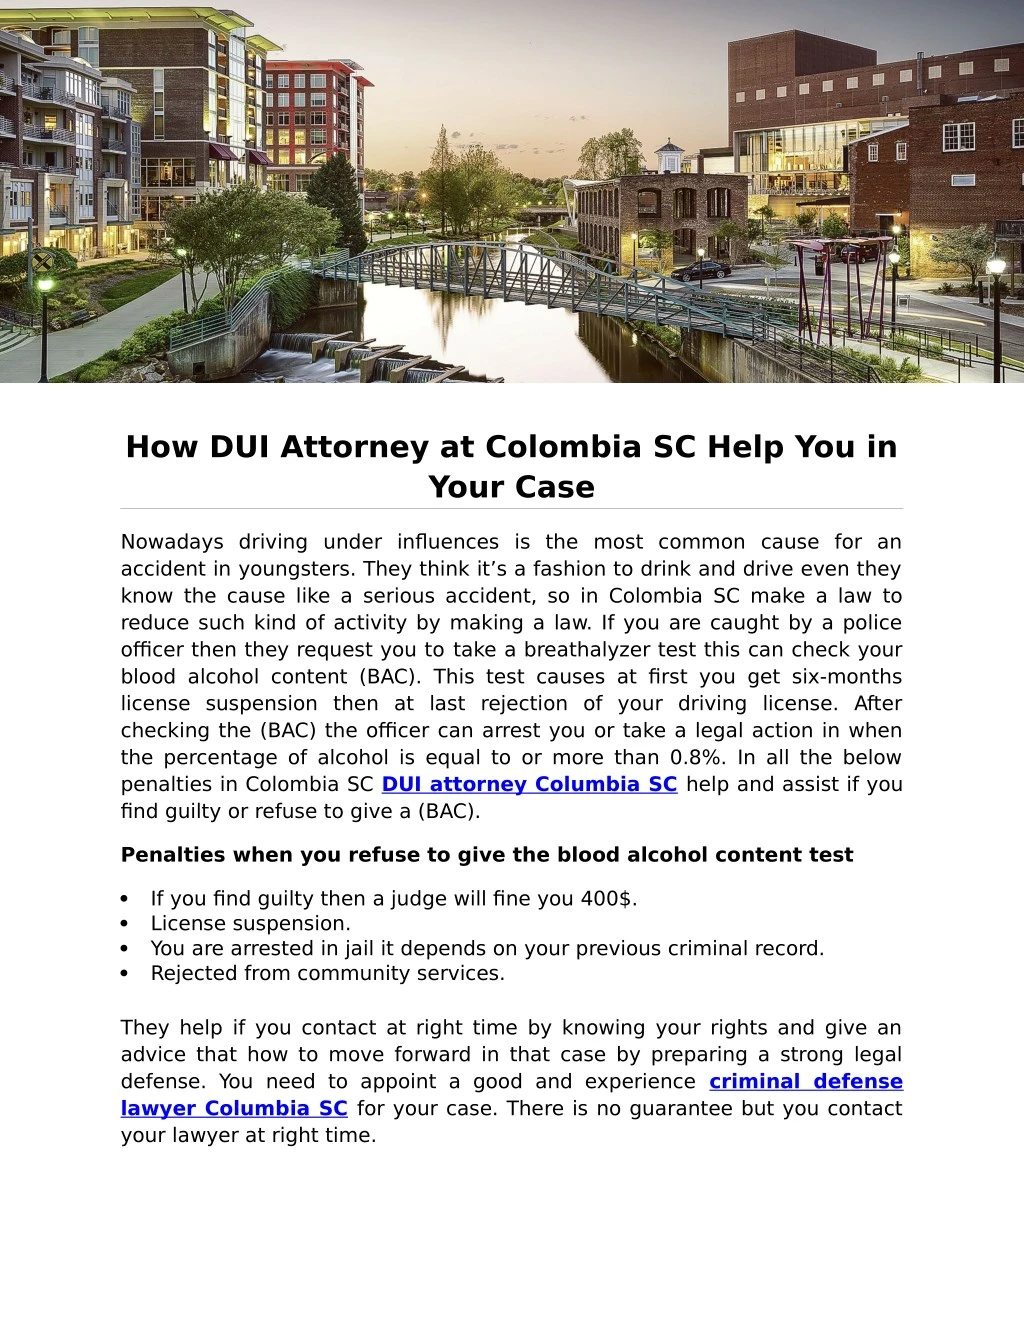 how dui attorney at colombia sc help you in your